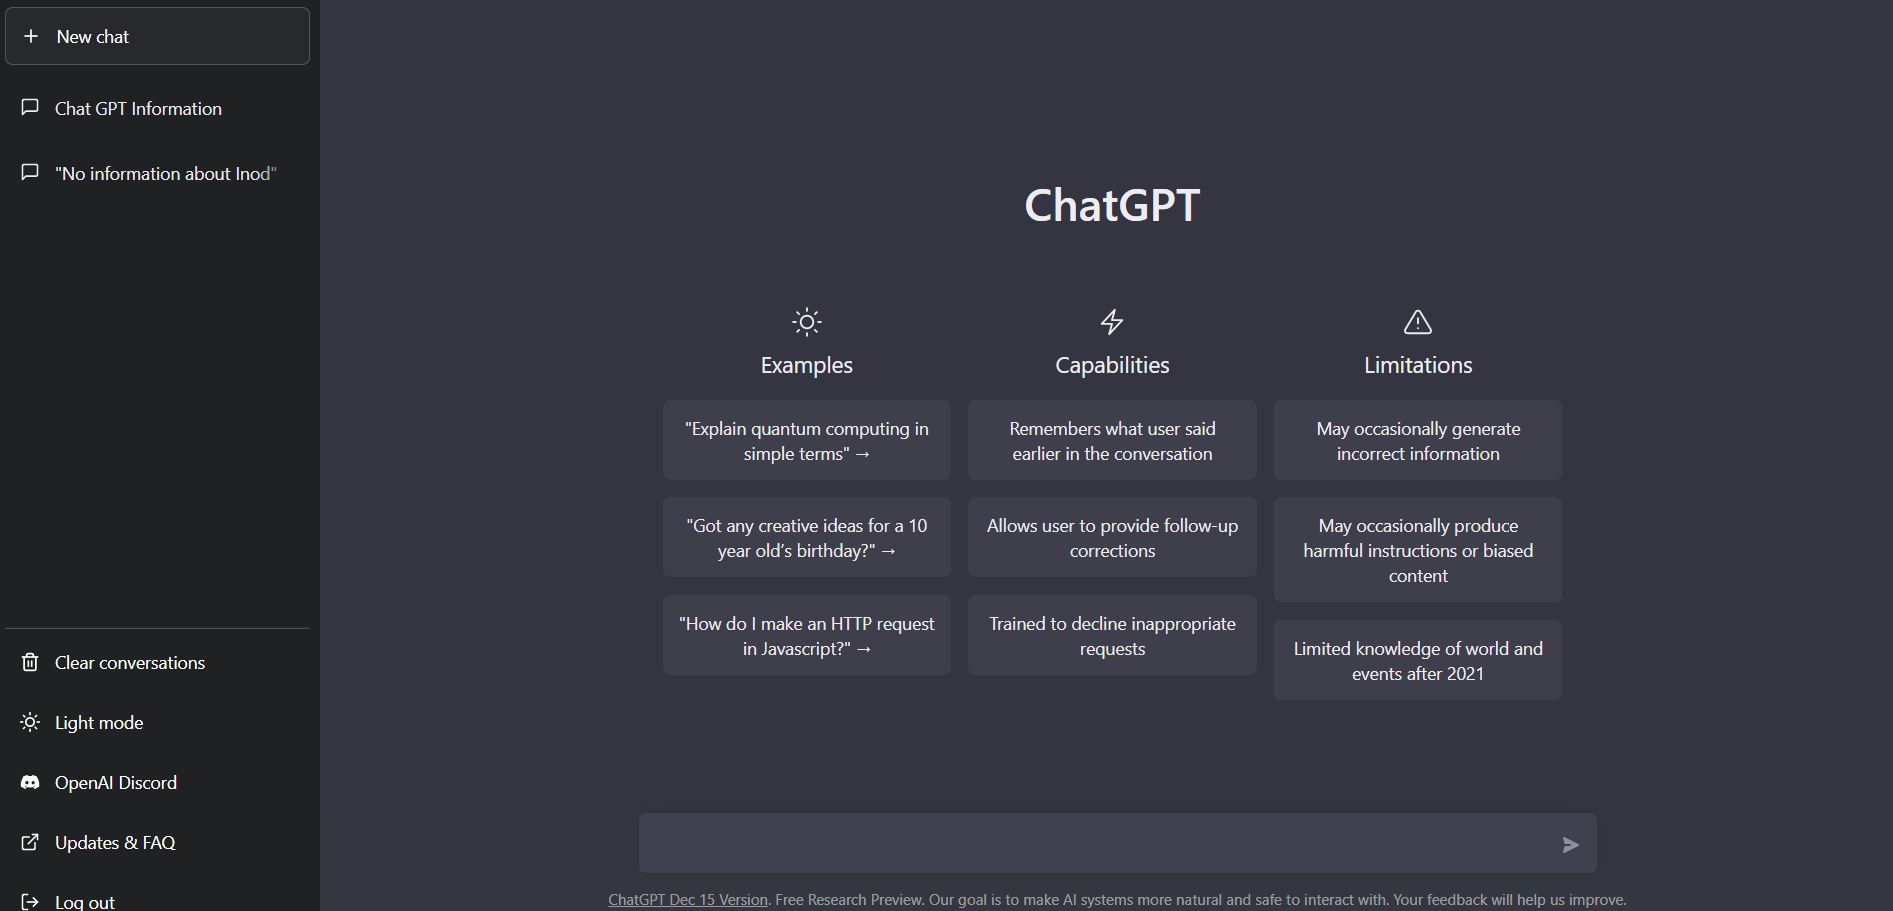 What is ChatGPI (Generative Pre-trained Transformer)